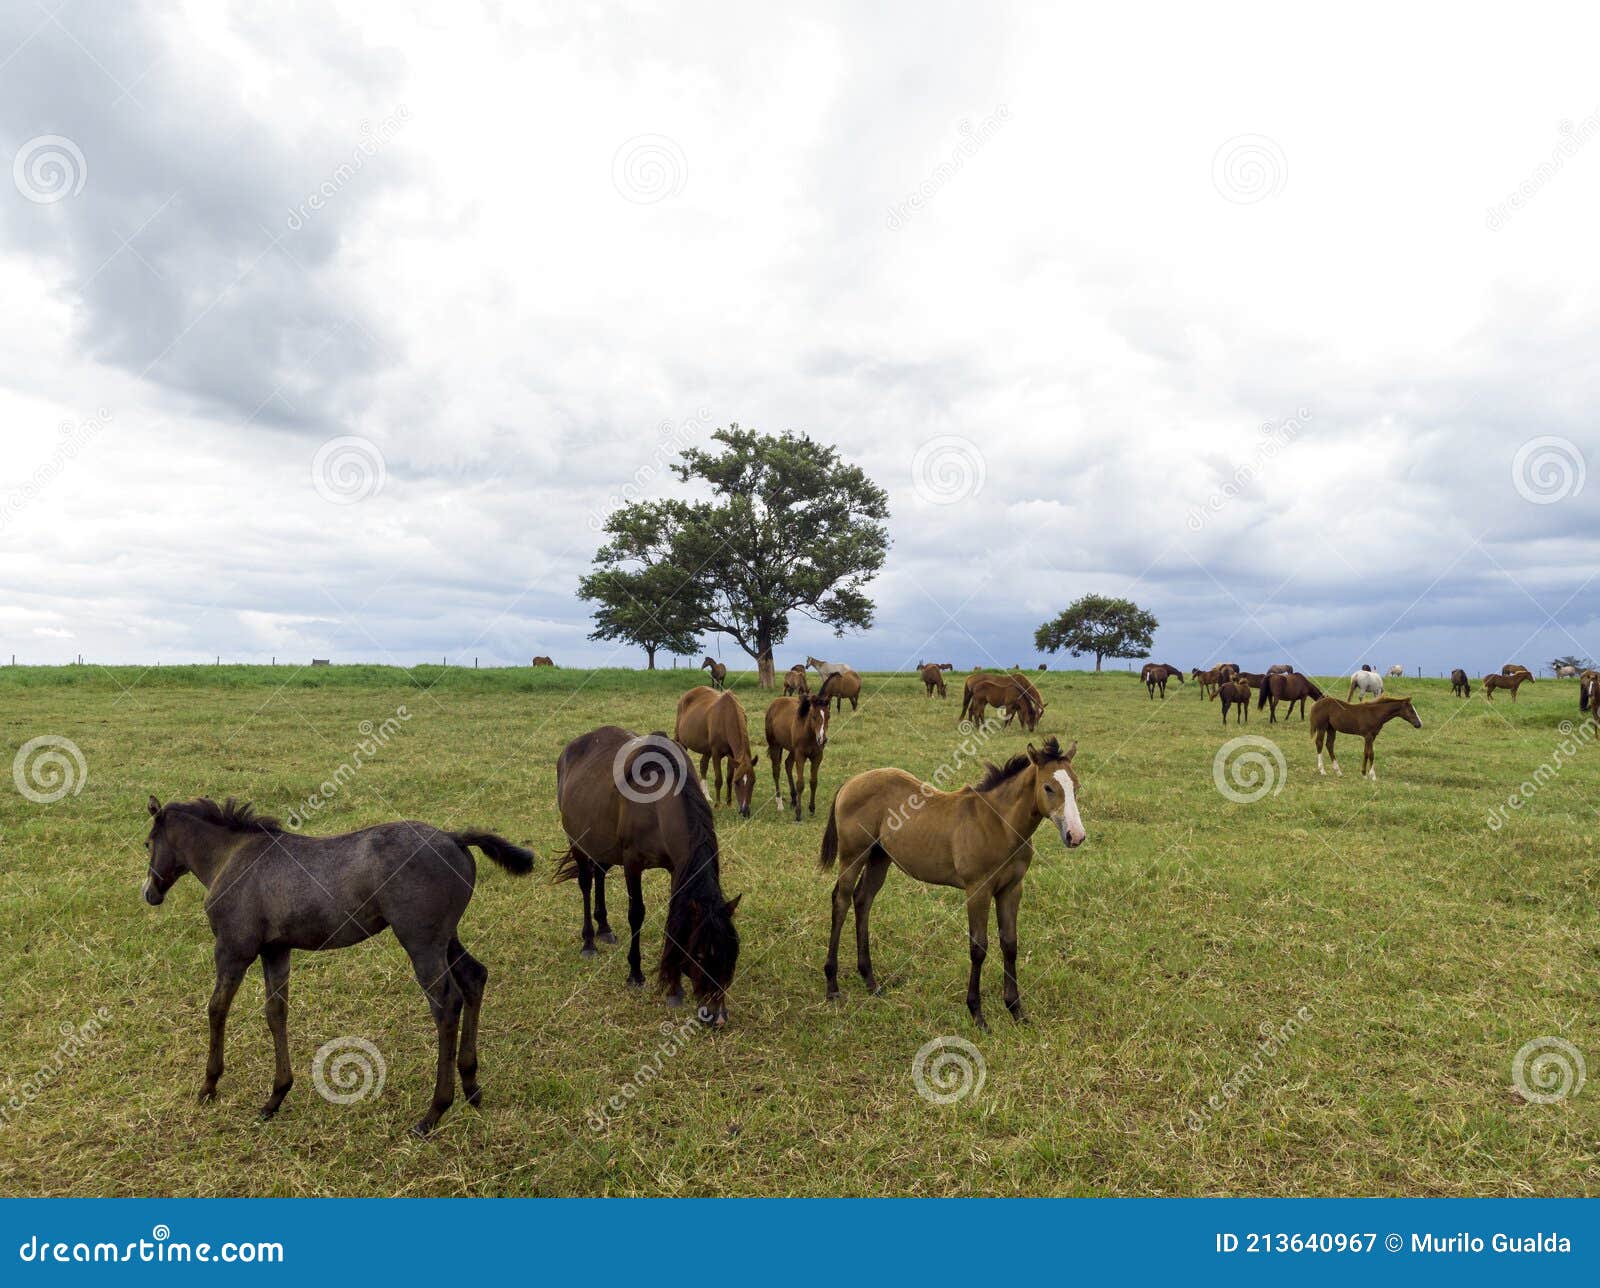 Thoroughbred Horses Grazing at Cloudy Day in a Field Stock Image ...